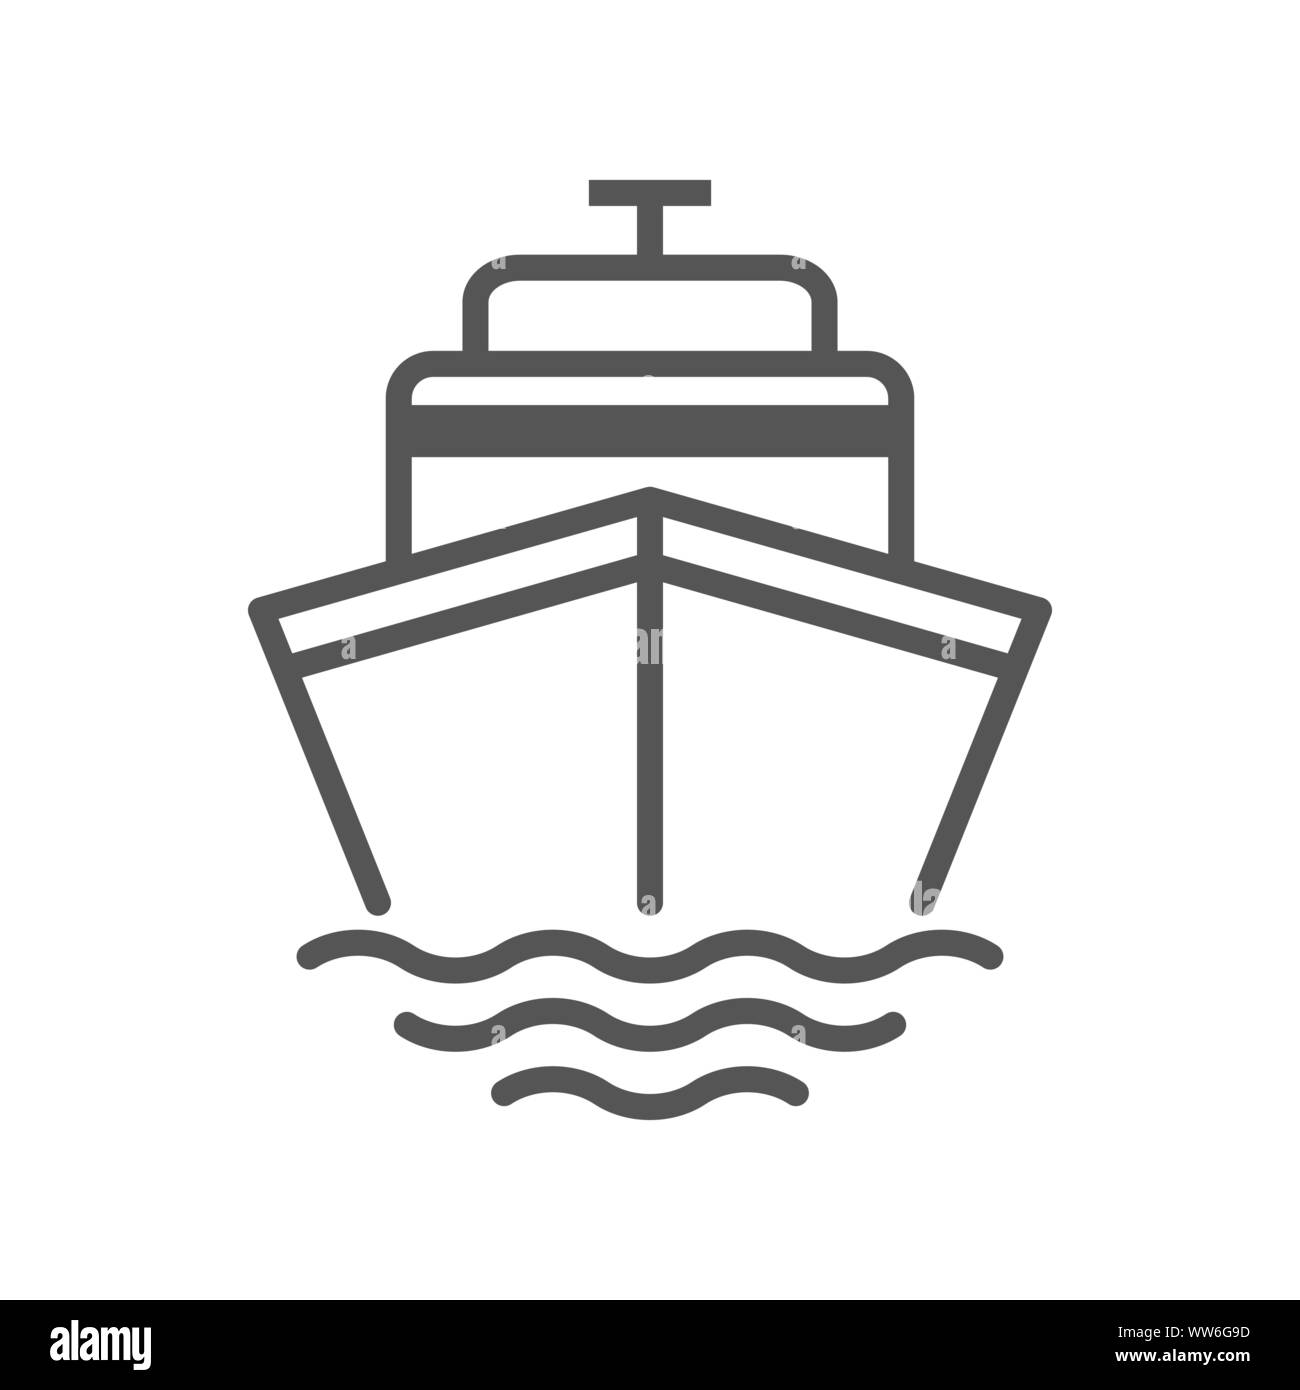 Cruise vector icon. Ship, transportation symbol. Vector sign isolated on white background. Simple vector illustration for graphic and web design. Stock Vector